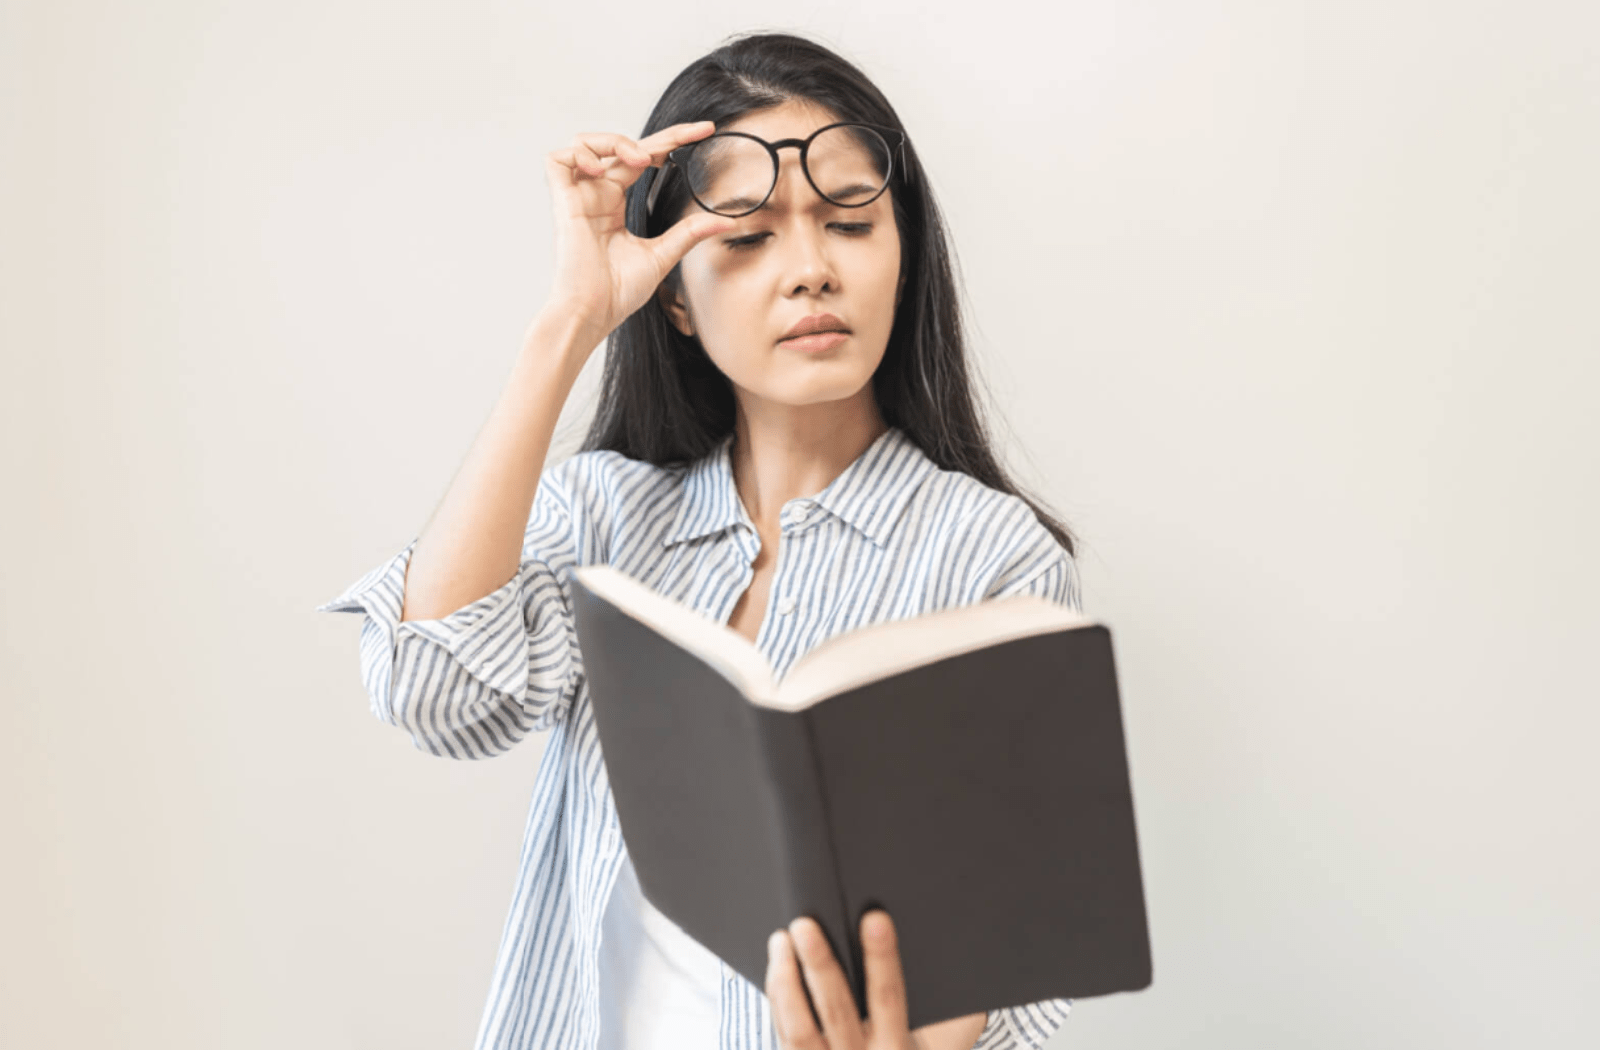 A woman trying to read a book, and she's holding up her glasses because it's hard to see the book